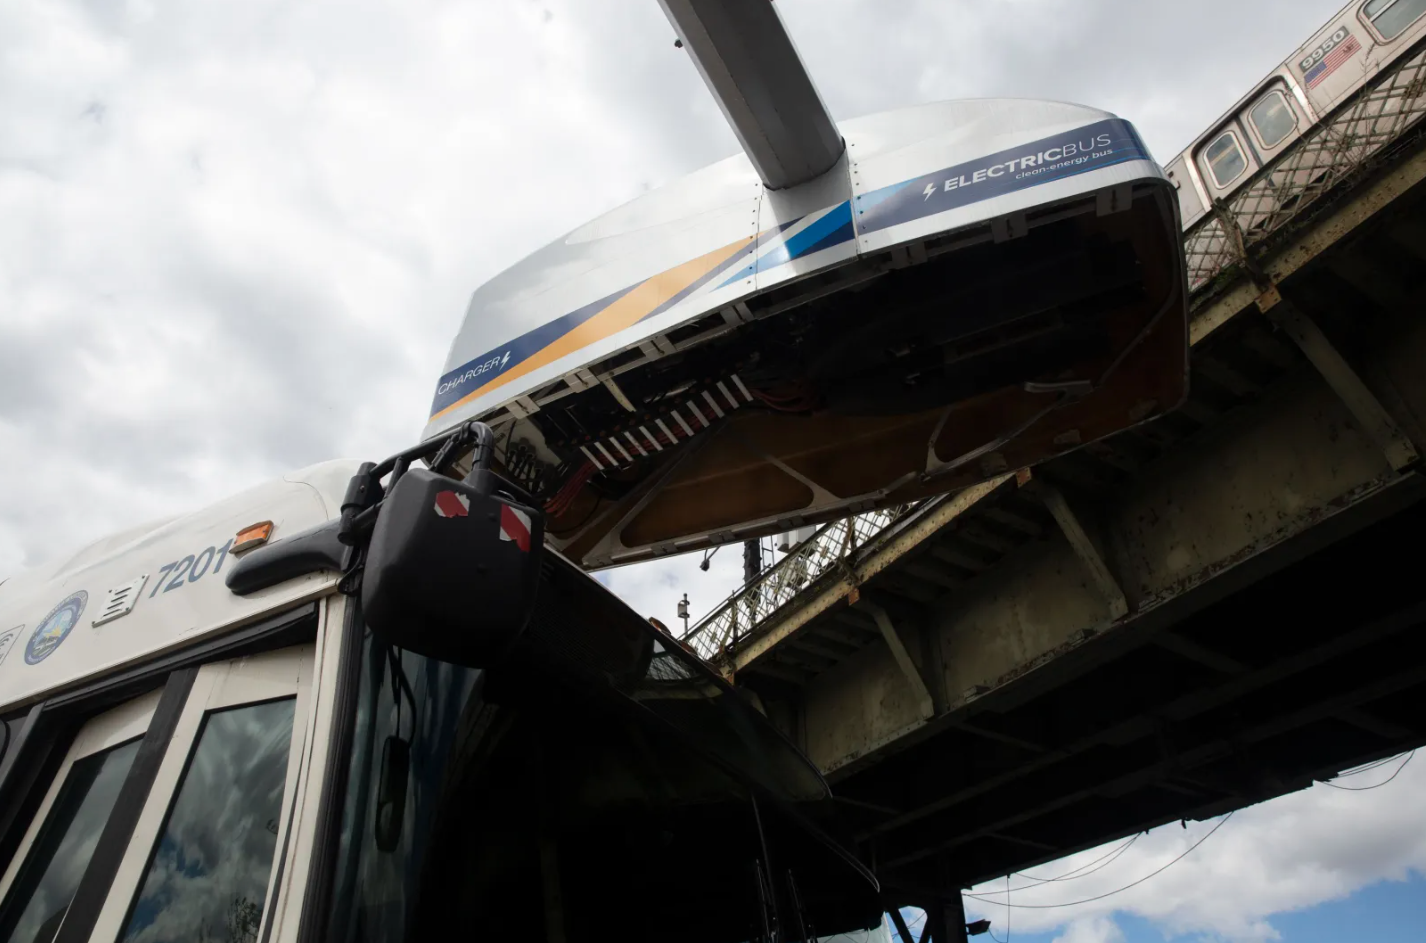 MTA’s On-Street Bus Chargers Need More Flood Protection, Study Warns